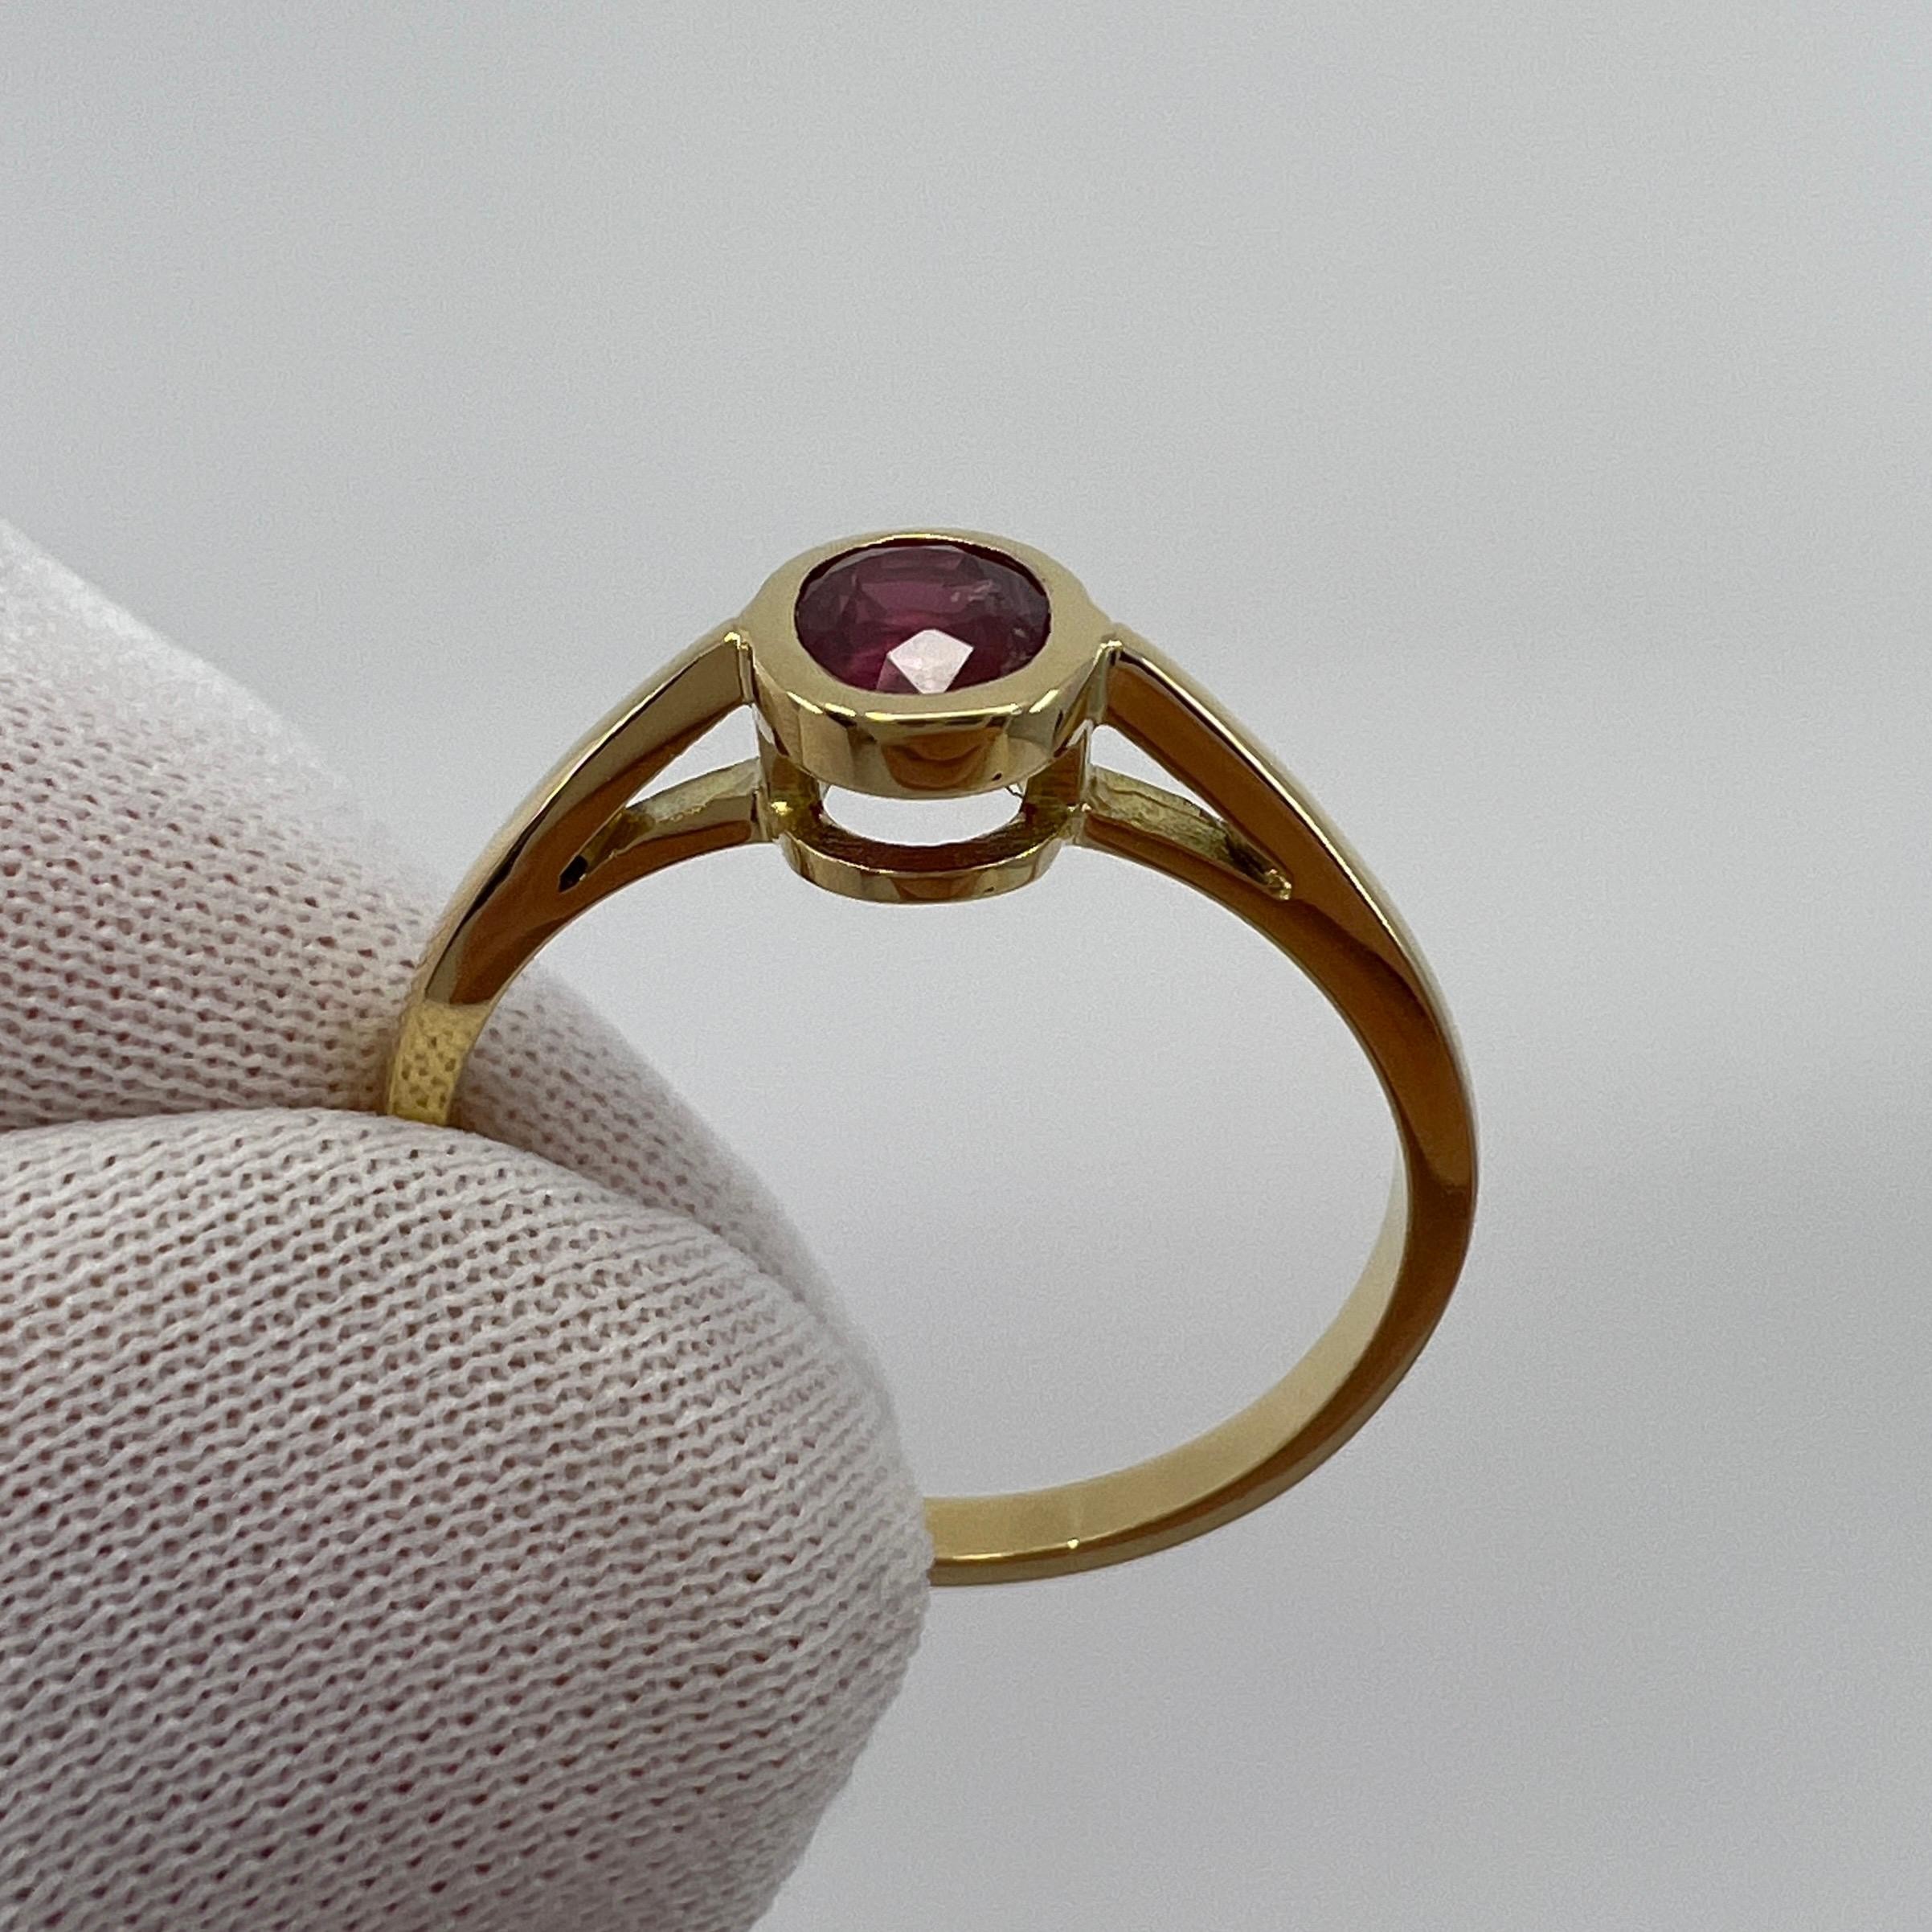 0,75ct Vivid Red Ruby Oval Cut 18k Gelbgold Lünette Rubover Solitaire Ring im Angebot 2